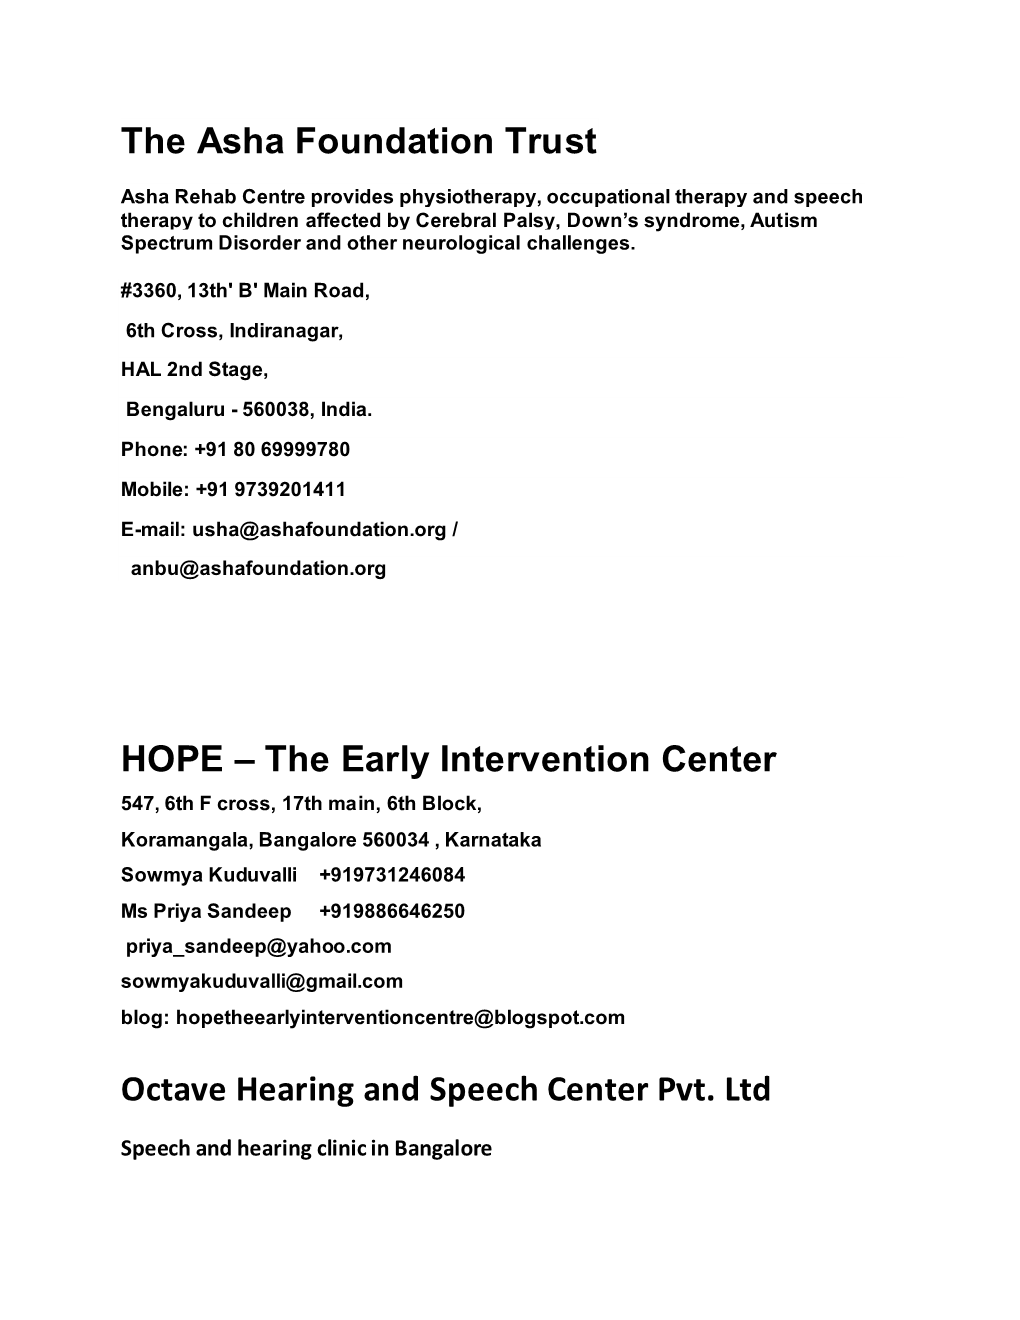 The Asha Foundation Trust HOPE – the Early Intervention Center